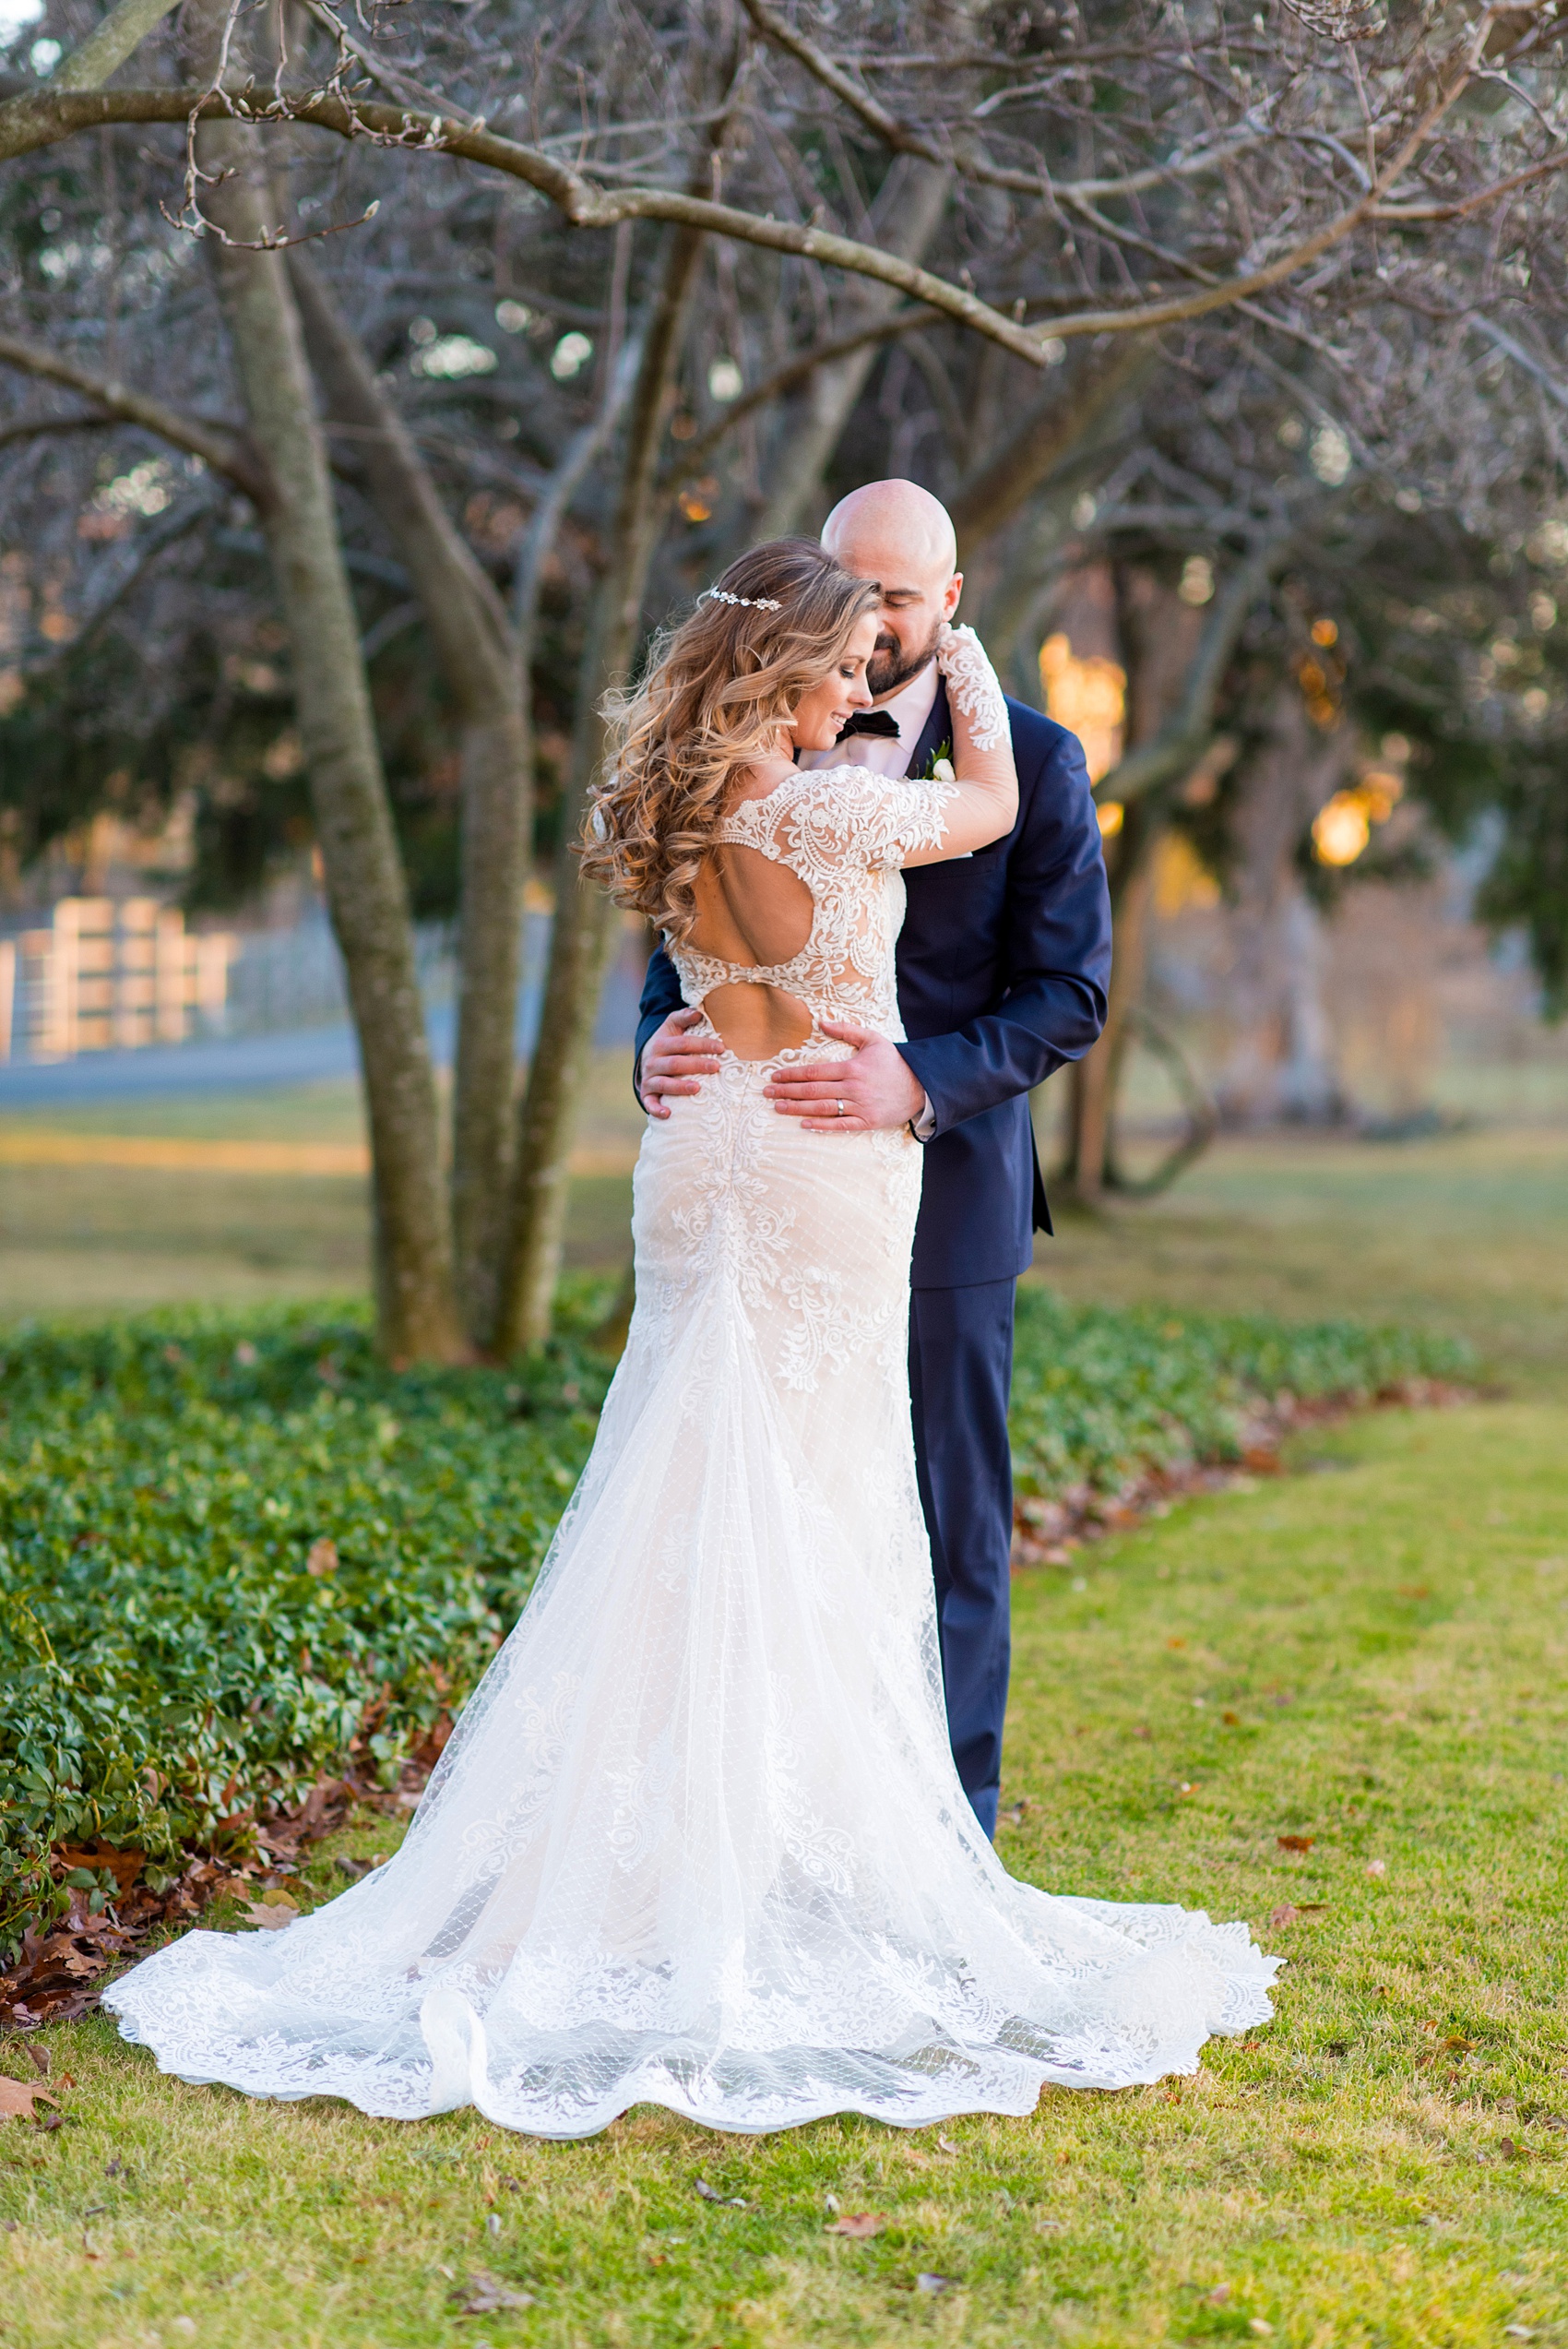 Winter wedding photos at Sleepy Hollow Country Club, New York about an hour from NYC, by Mikkel Paige Photography. The bride wore a long sleeve lace gown and the groom wore a navy blue suit with a black lapel. #winterwedding #NYweddingphotos #SleepyHollowNY